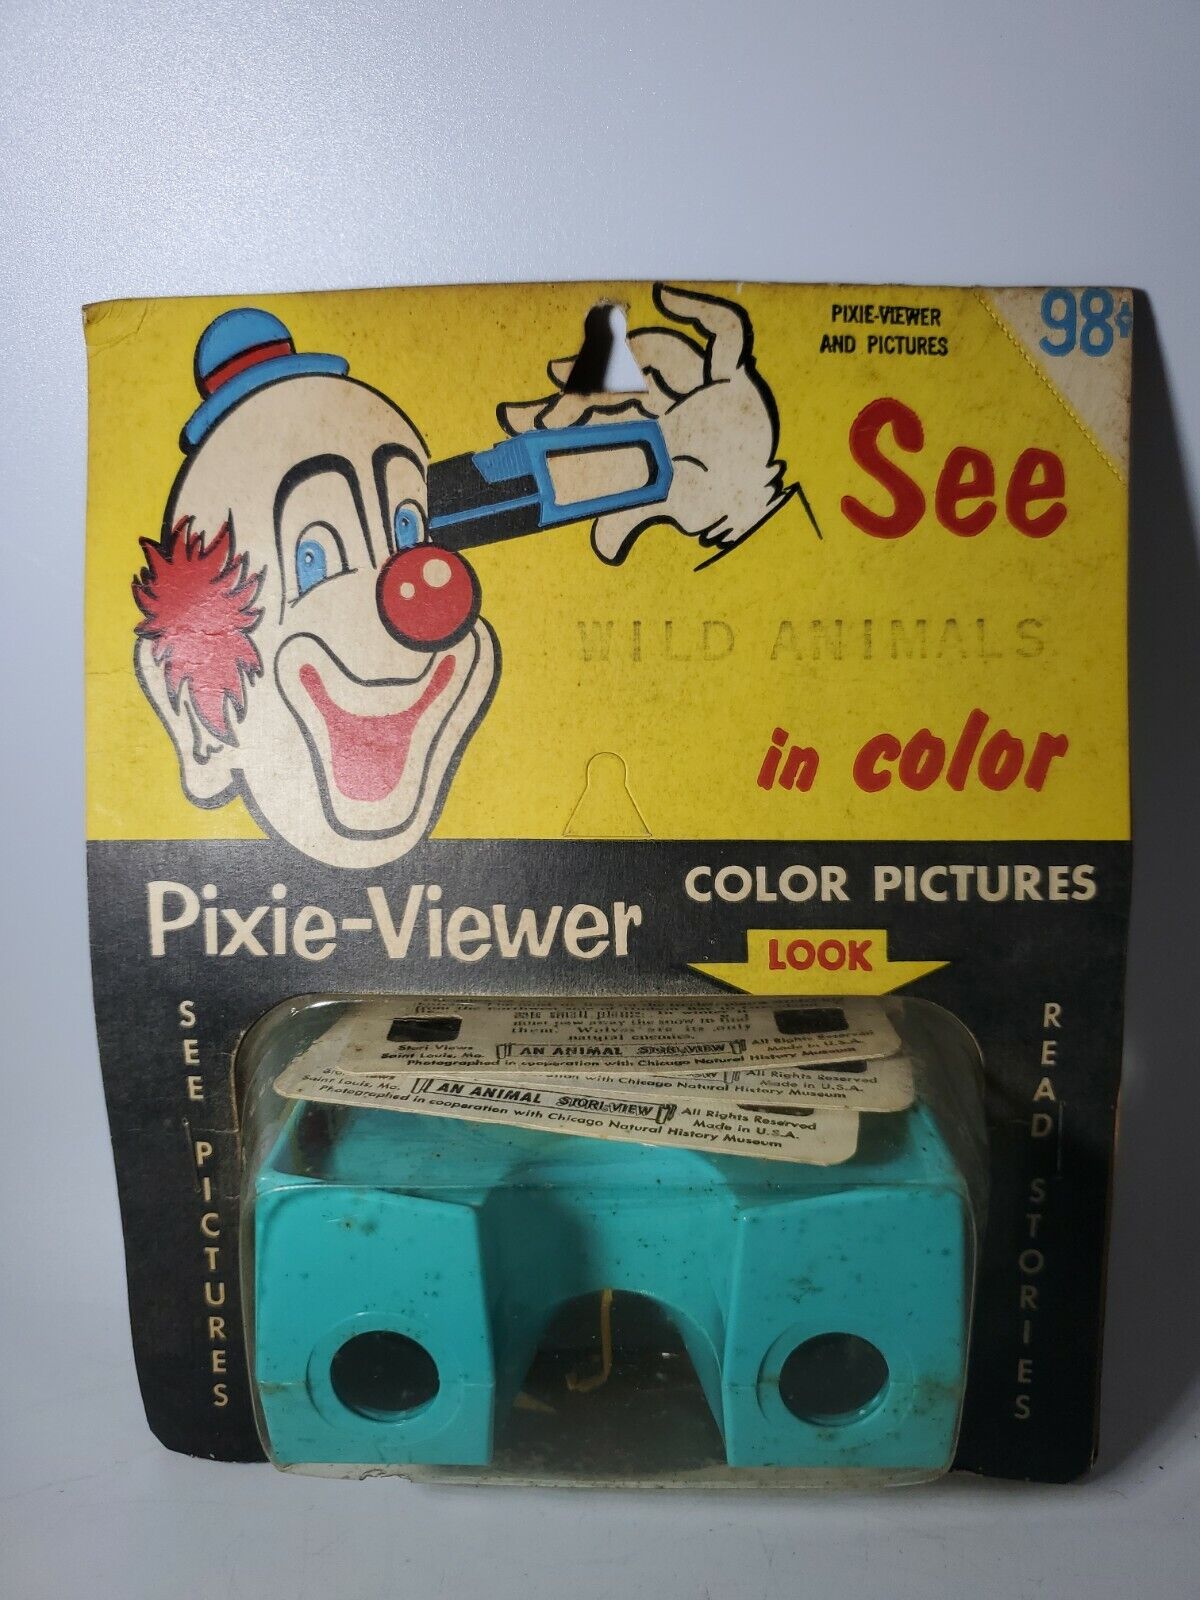 Vintage Stori Views Pixie Viewer New Old Stock 1950's-60's RARE USA MADE